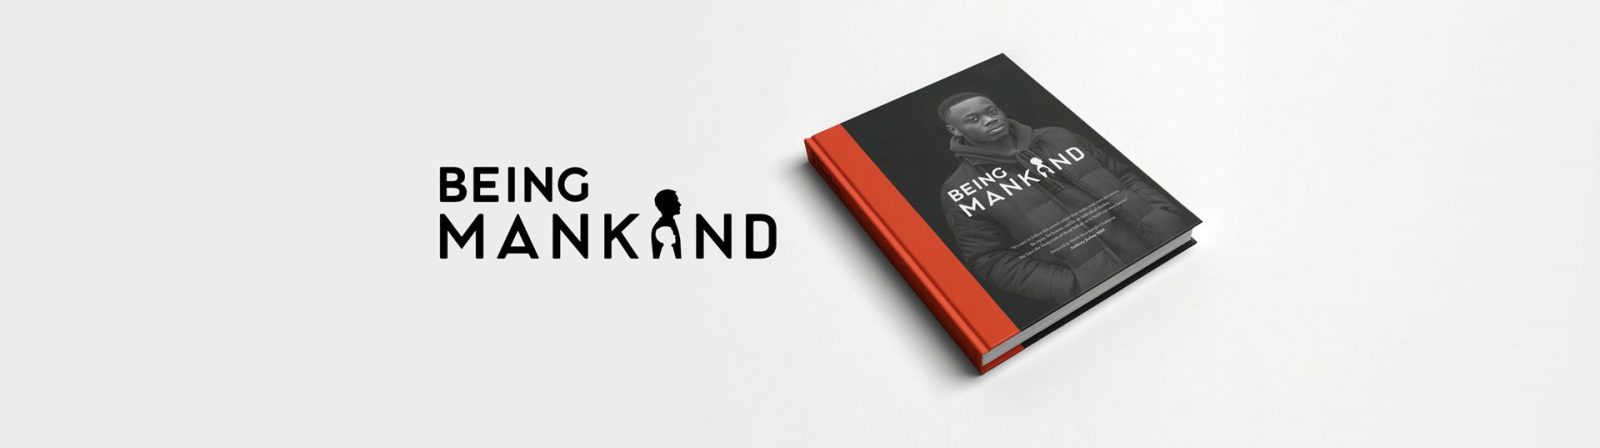 Being-Mankind-web-banners-mockup-hi_res-01-1-e1491743414695